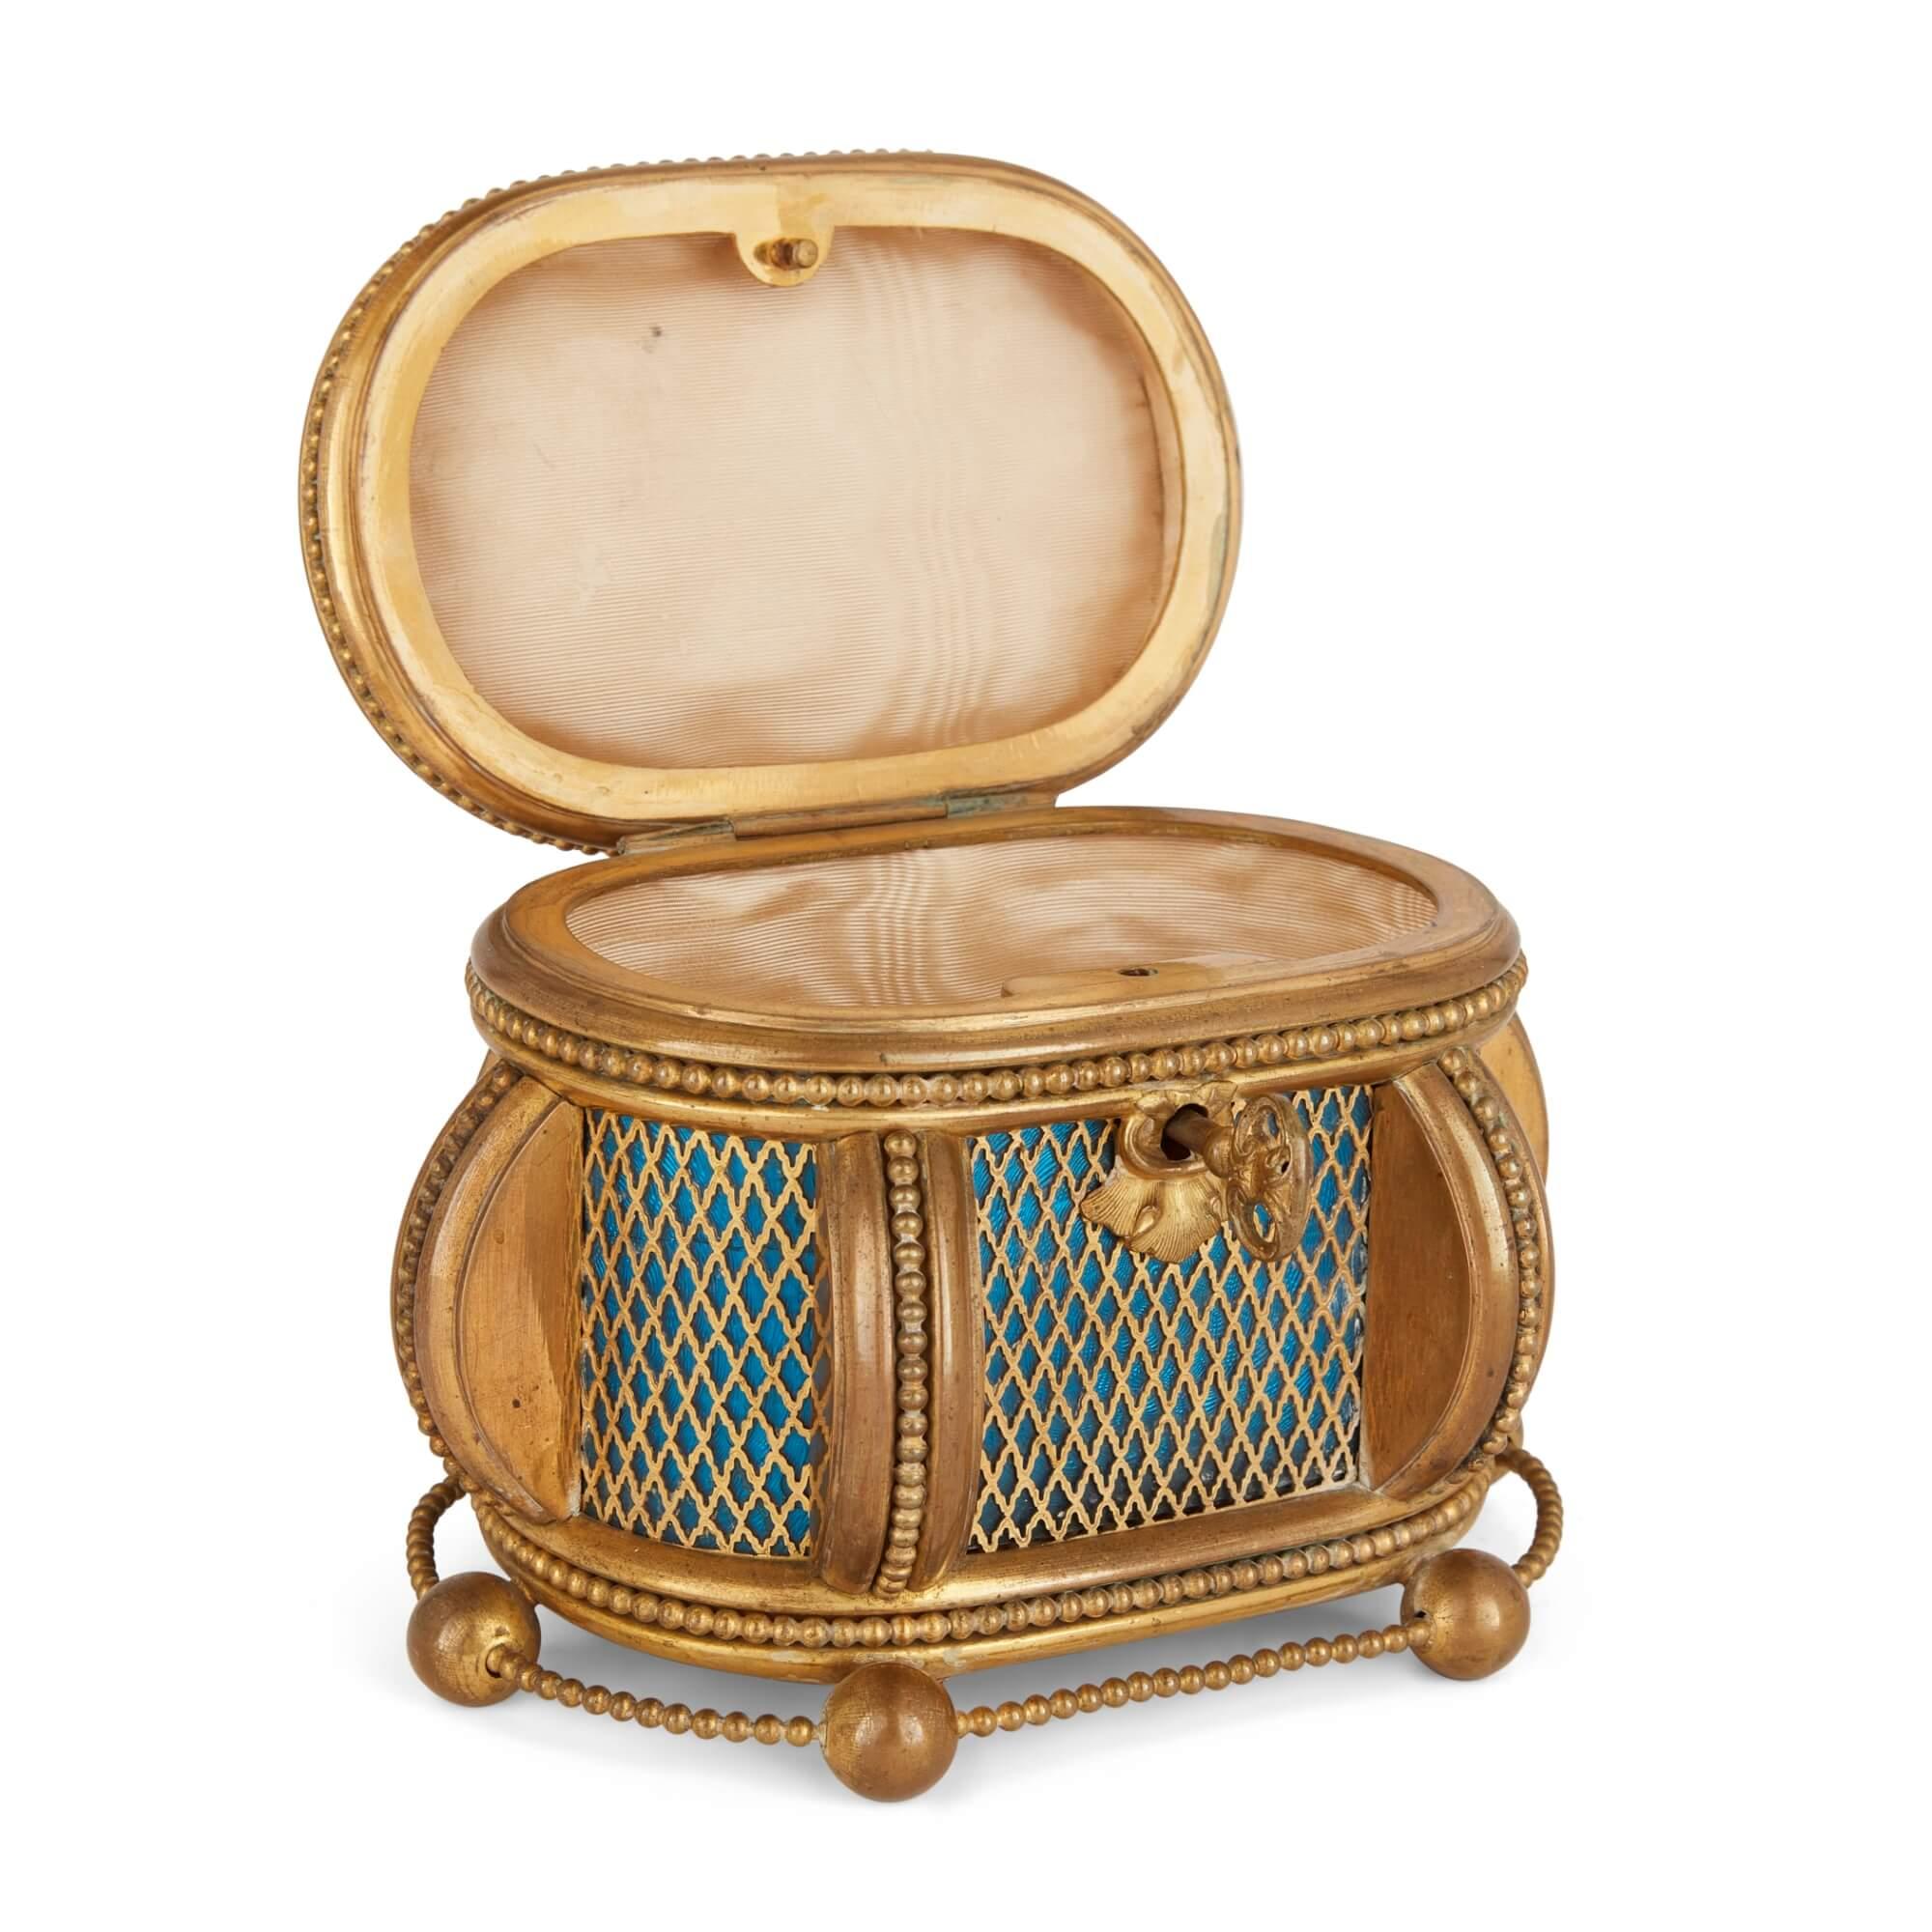 19th century blue guilloché enamel and gilt-metal casket 
French, 19th Century 
Height 11cm, width 15cm, depth 10cm

This exquisite piece highlights the expert designs emerging from France in the 19th Century. The main body of the casket is crafted